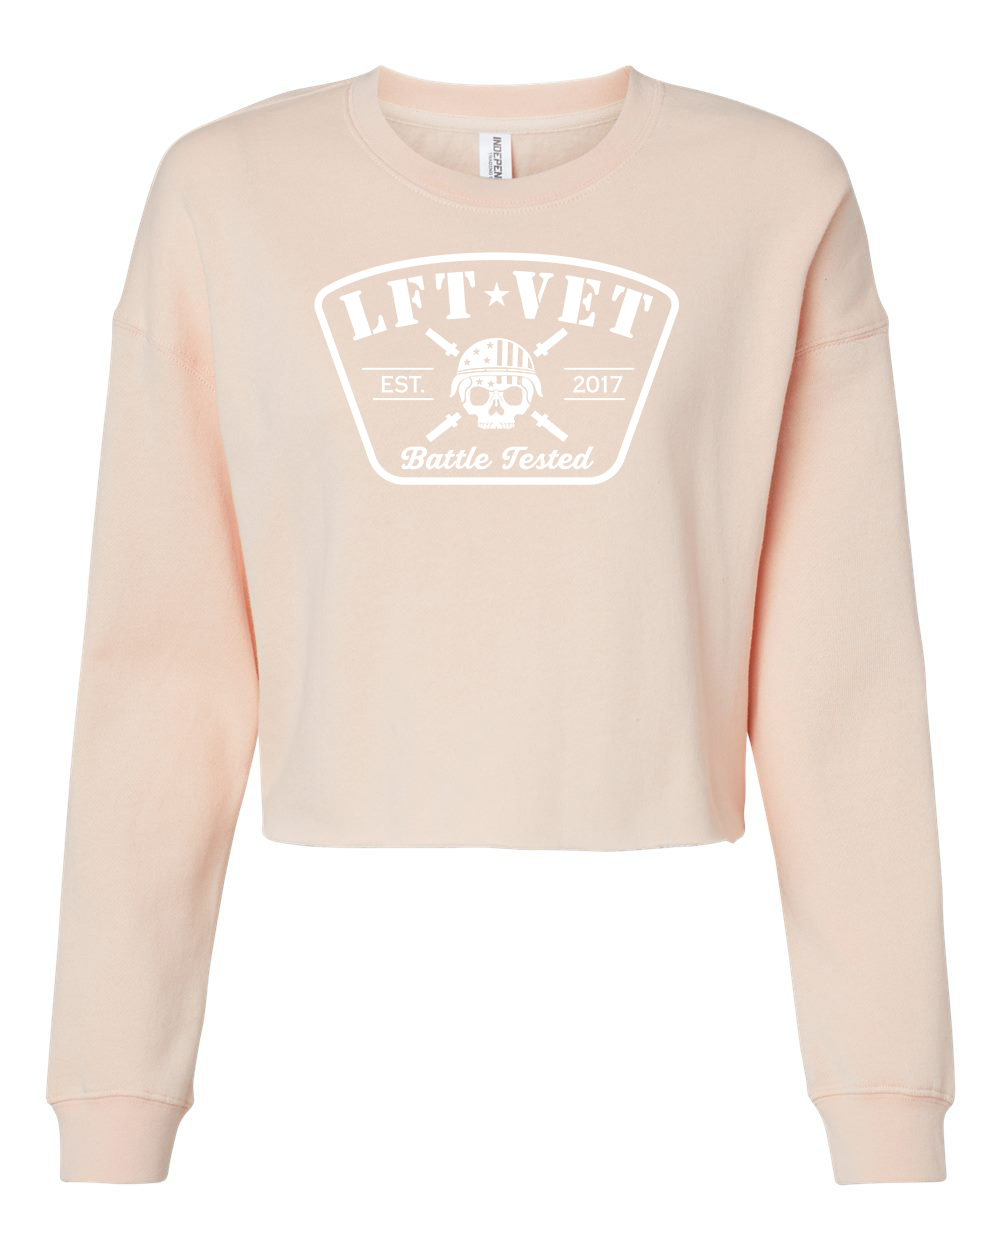 Battle Tested Patch Cropped Crew Pullover